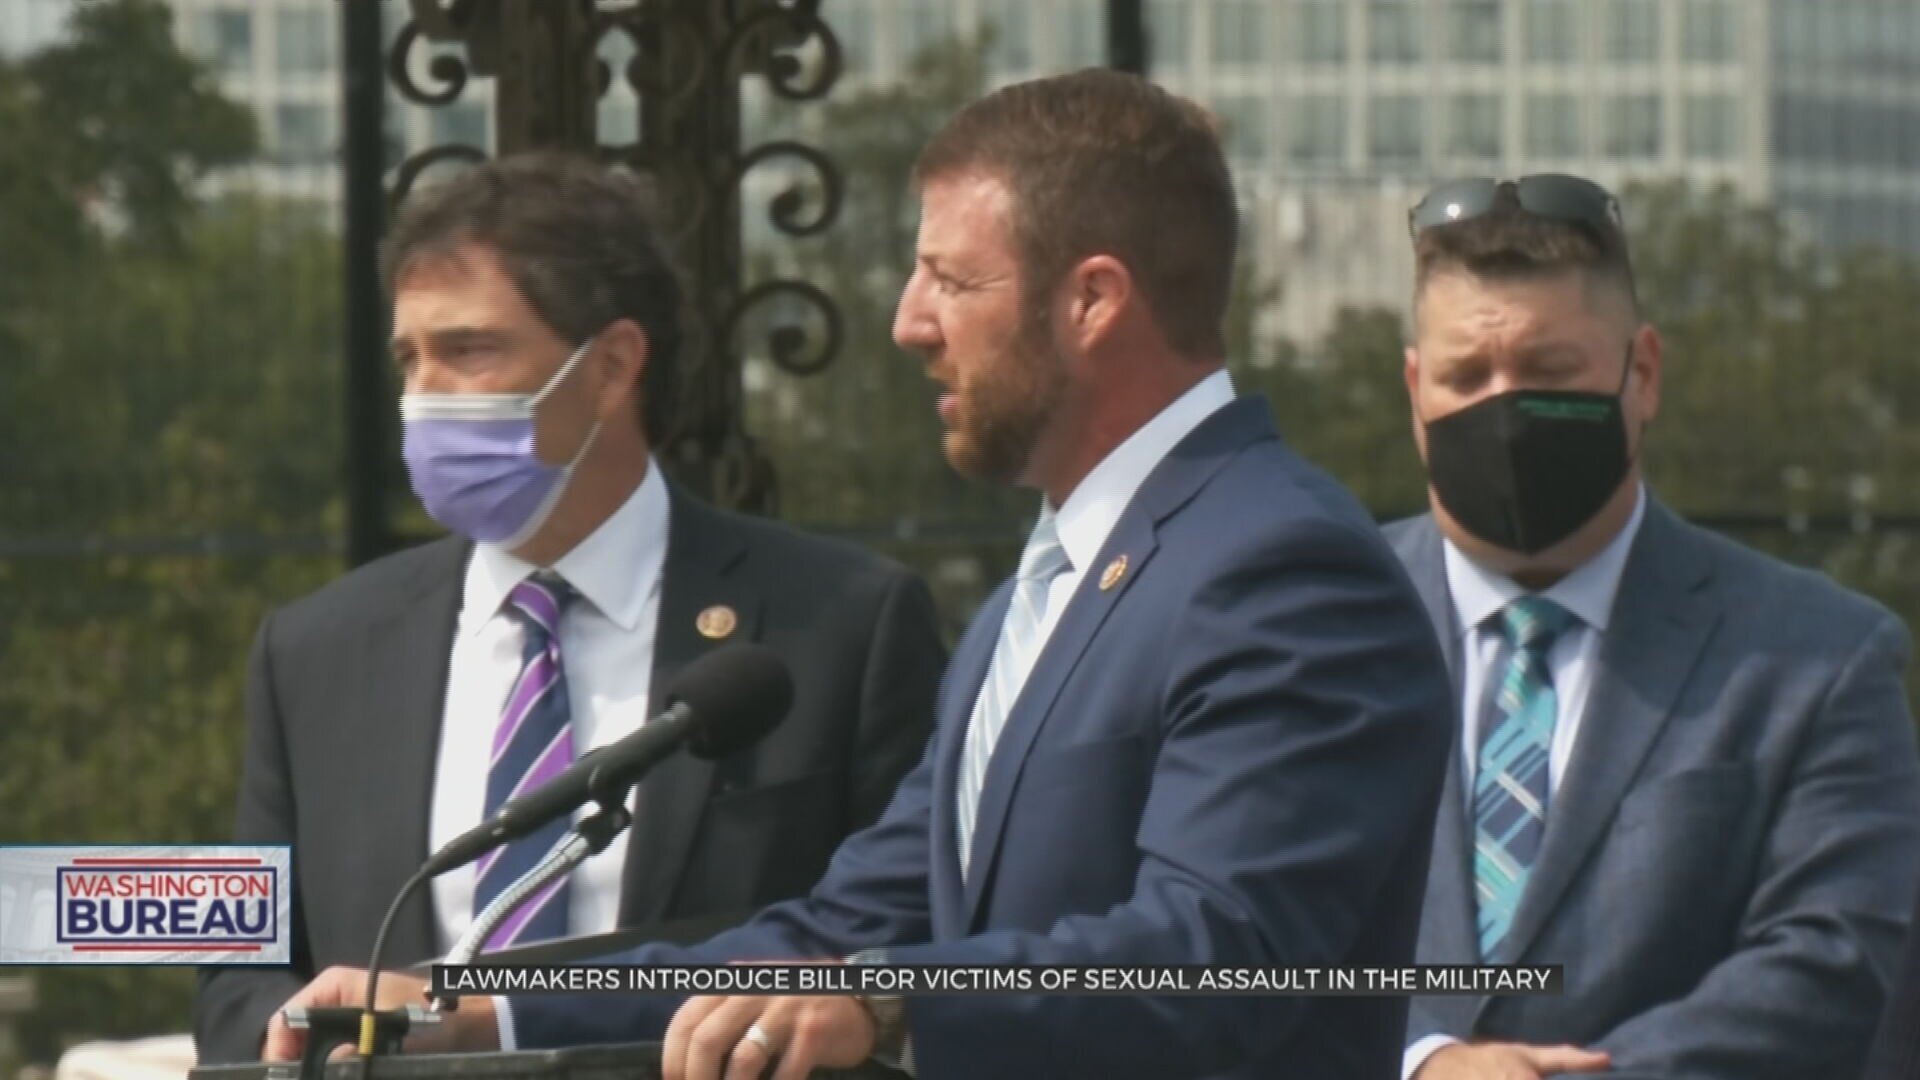 Oklahoma Lawmaker Leads Charge For Change For Sexual Assault Victims In Military 